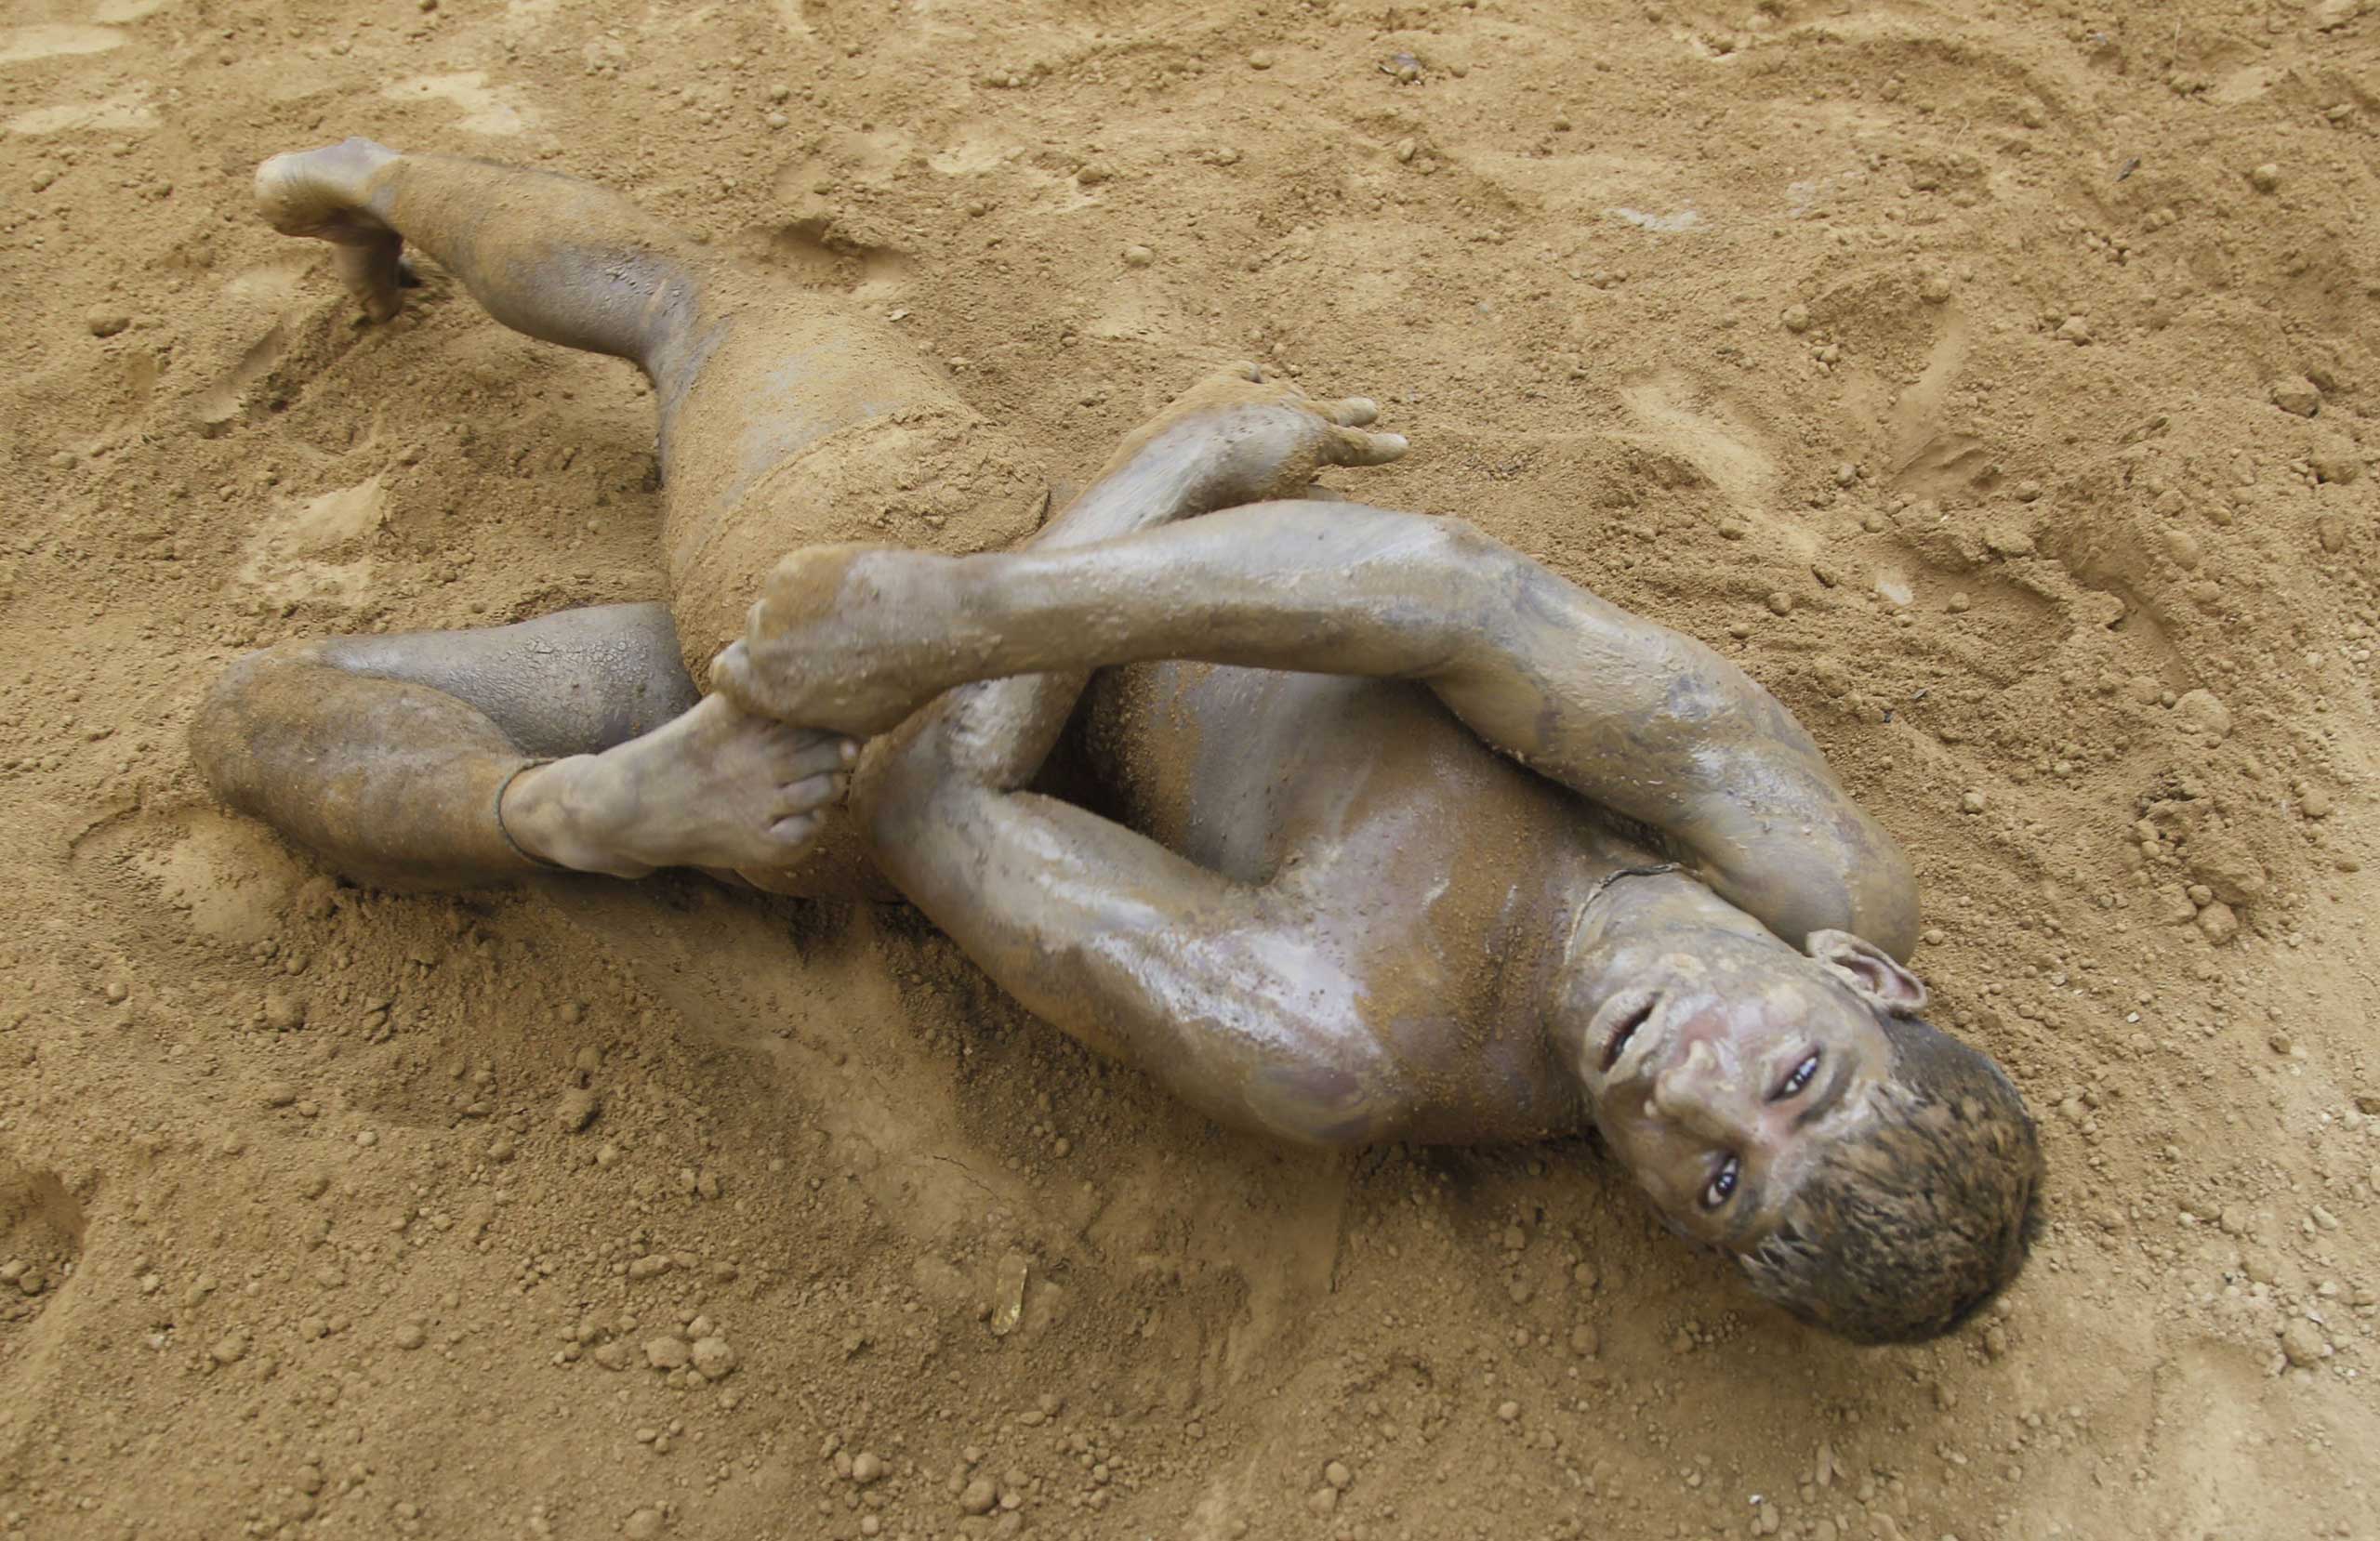 Sept. 12, 2014. Wrestlers seen practicing in the mud at a traditional wrestling rink in Uttar Pradesh, India.